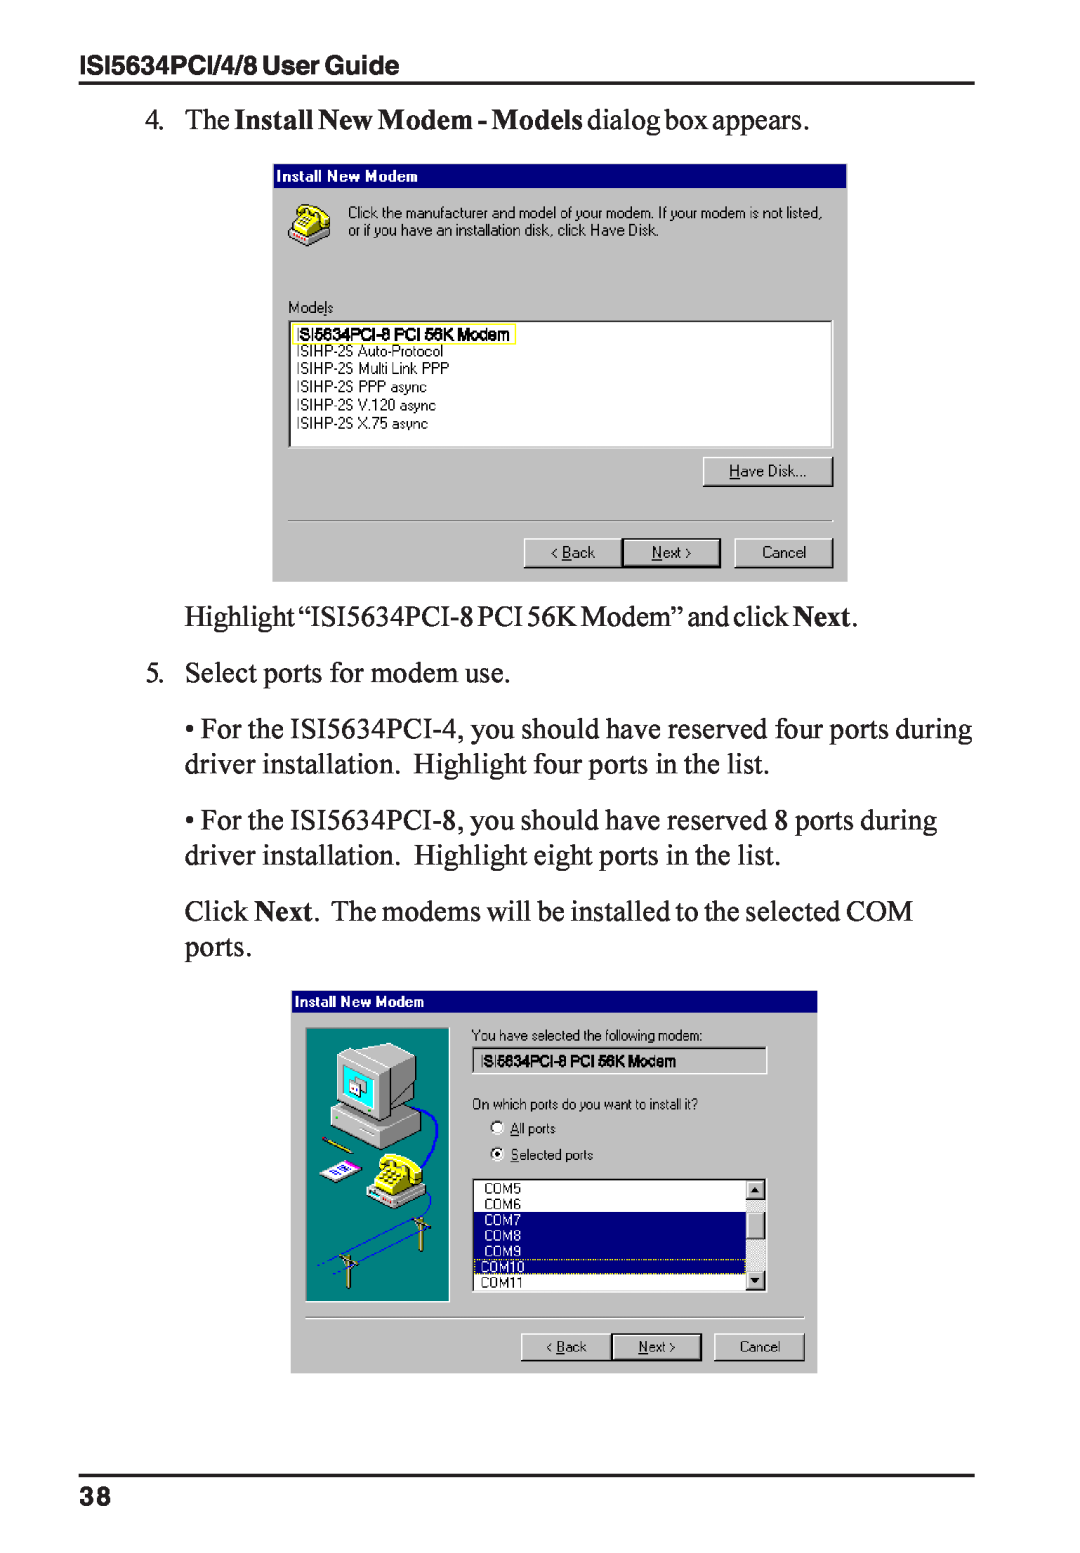 Multi-Tech Systems ISI5634PCI/4/8 manual The Install New Modem - Models dialog box appears 